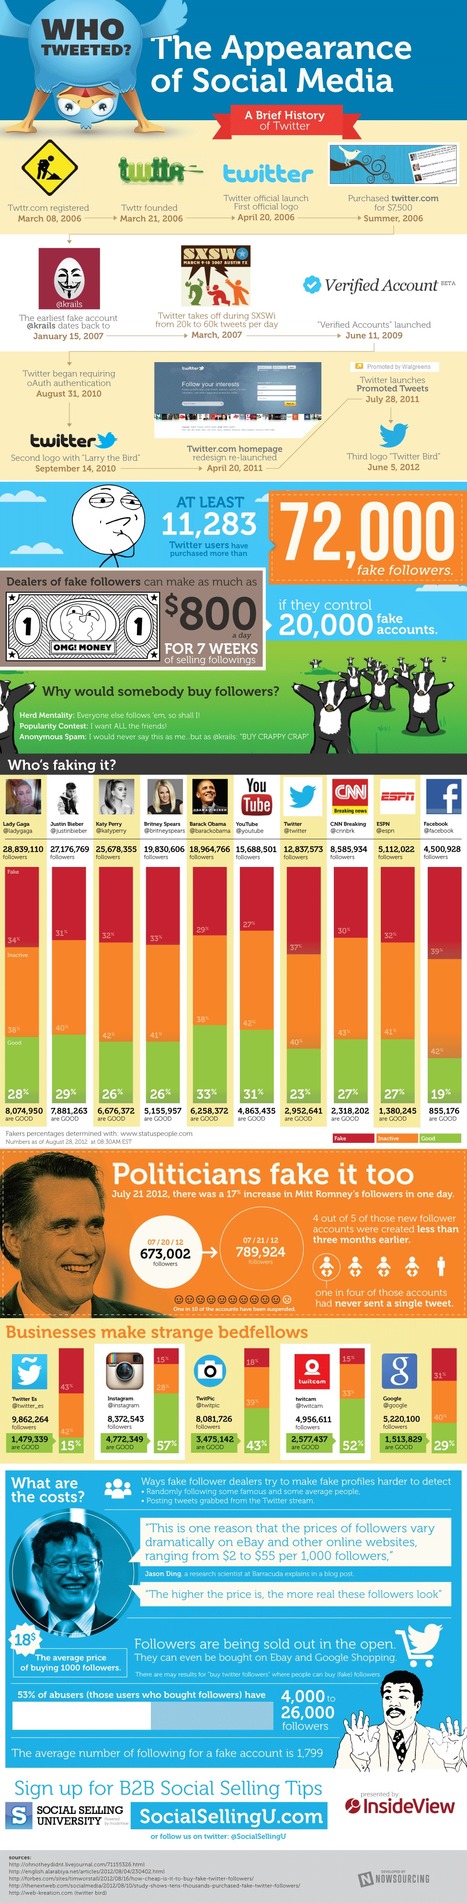 How Do You Sort Out Fake Followers From Real Ones on Twitter? [INFOGRAPHIC] | Latest Social Media News | Scoop.it